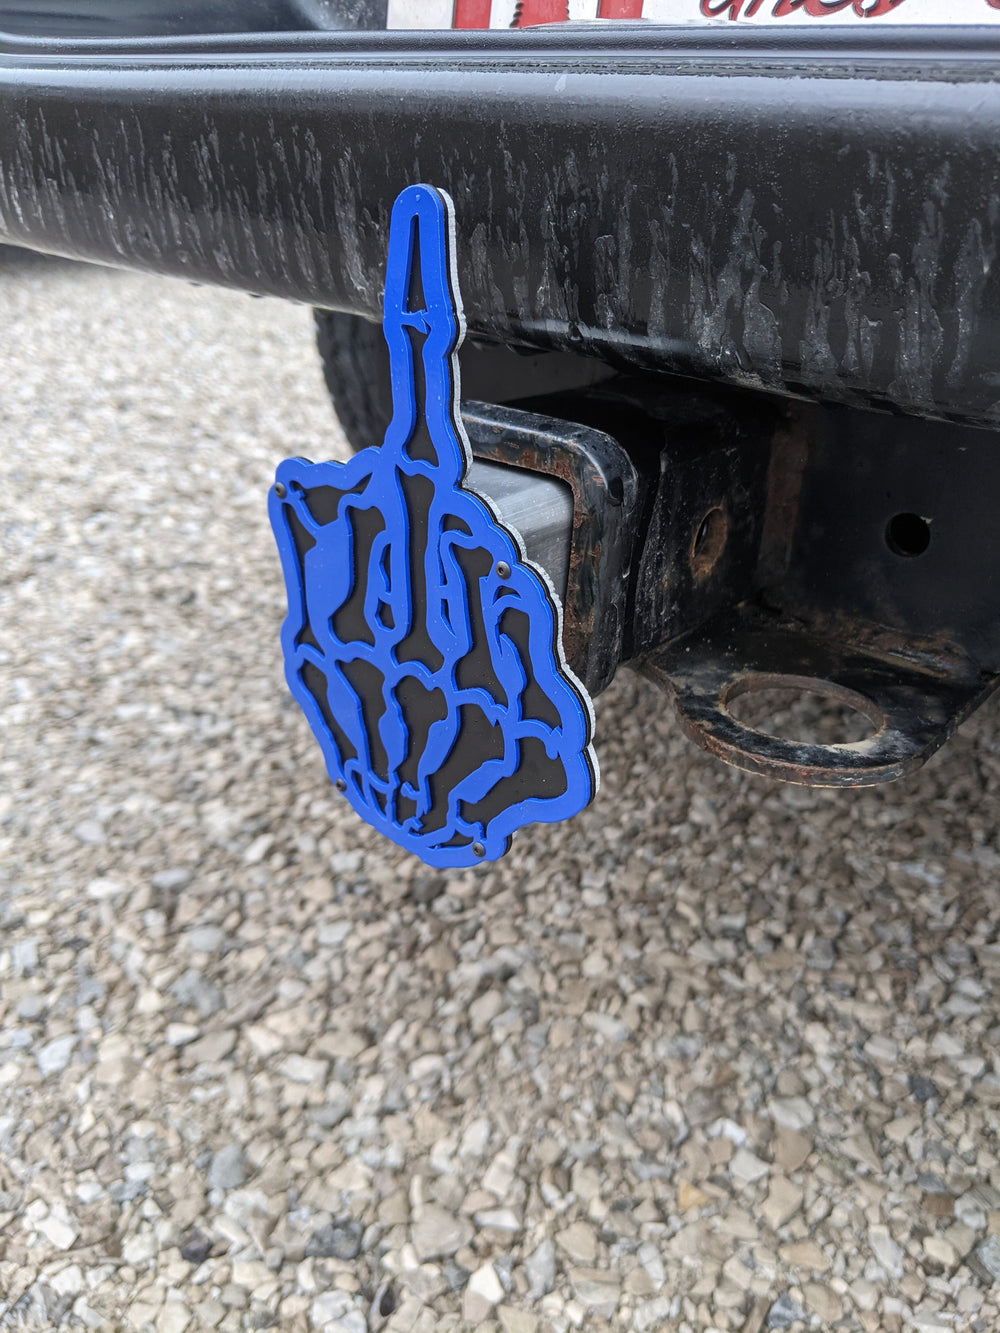 Skeleton Middle Finger Hitch Cover - Fully Customizable